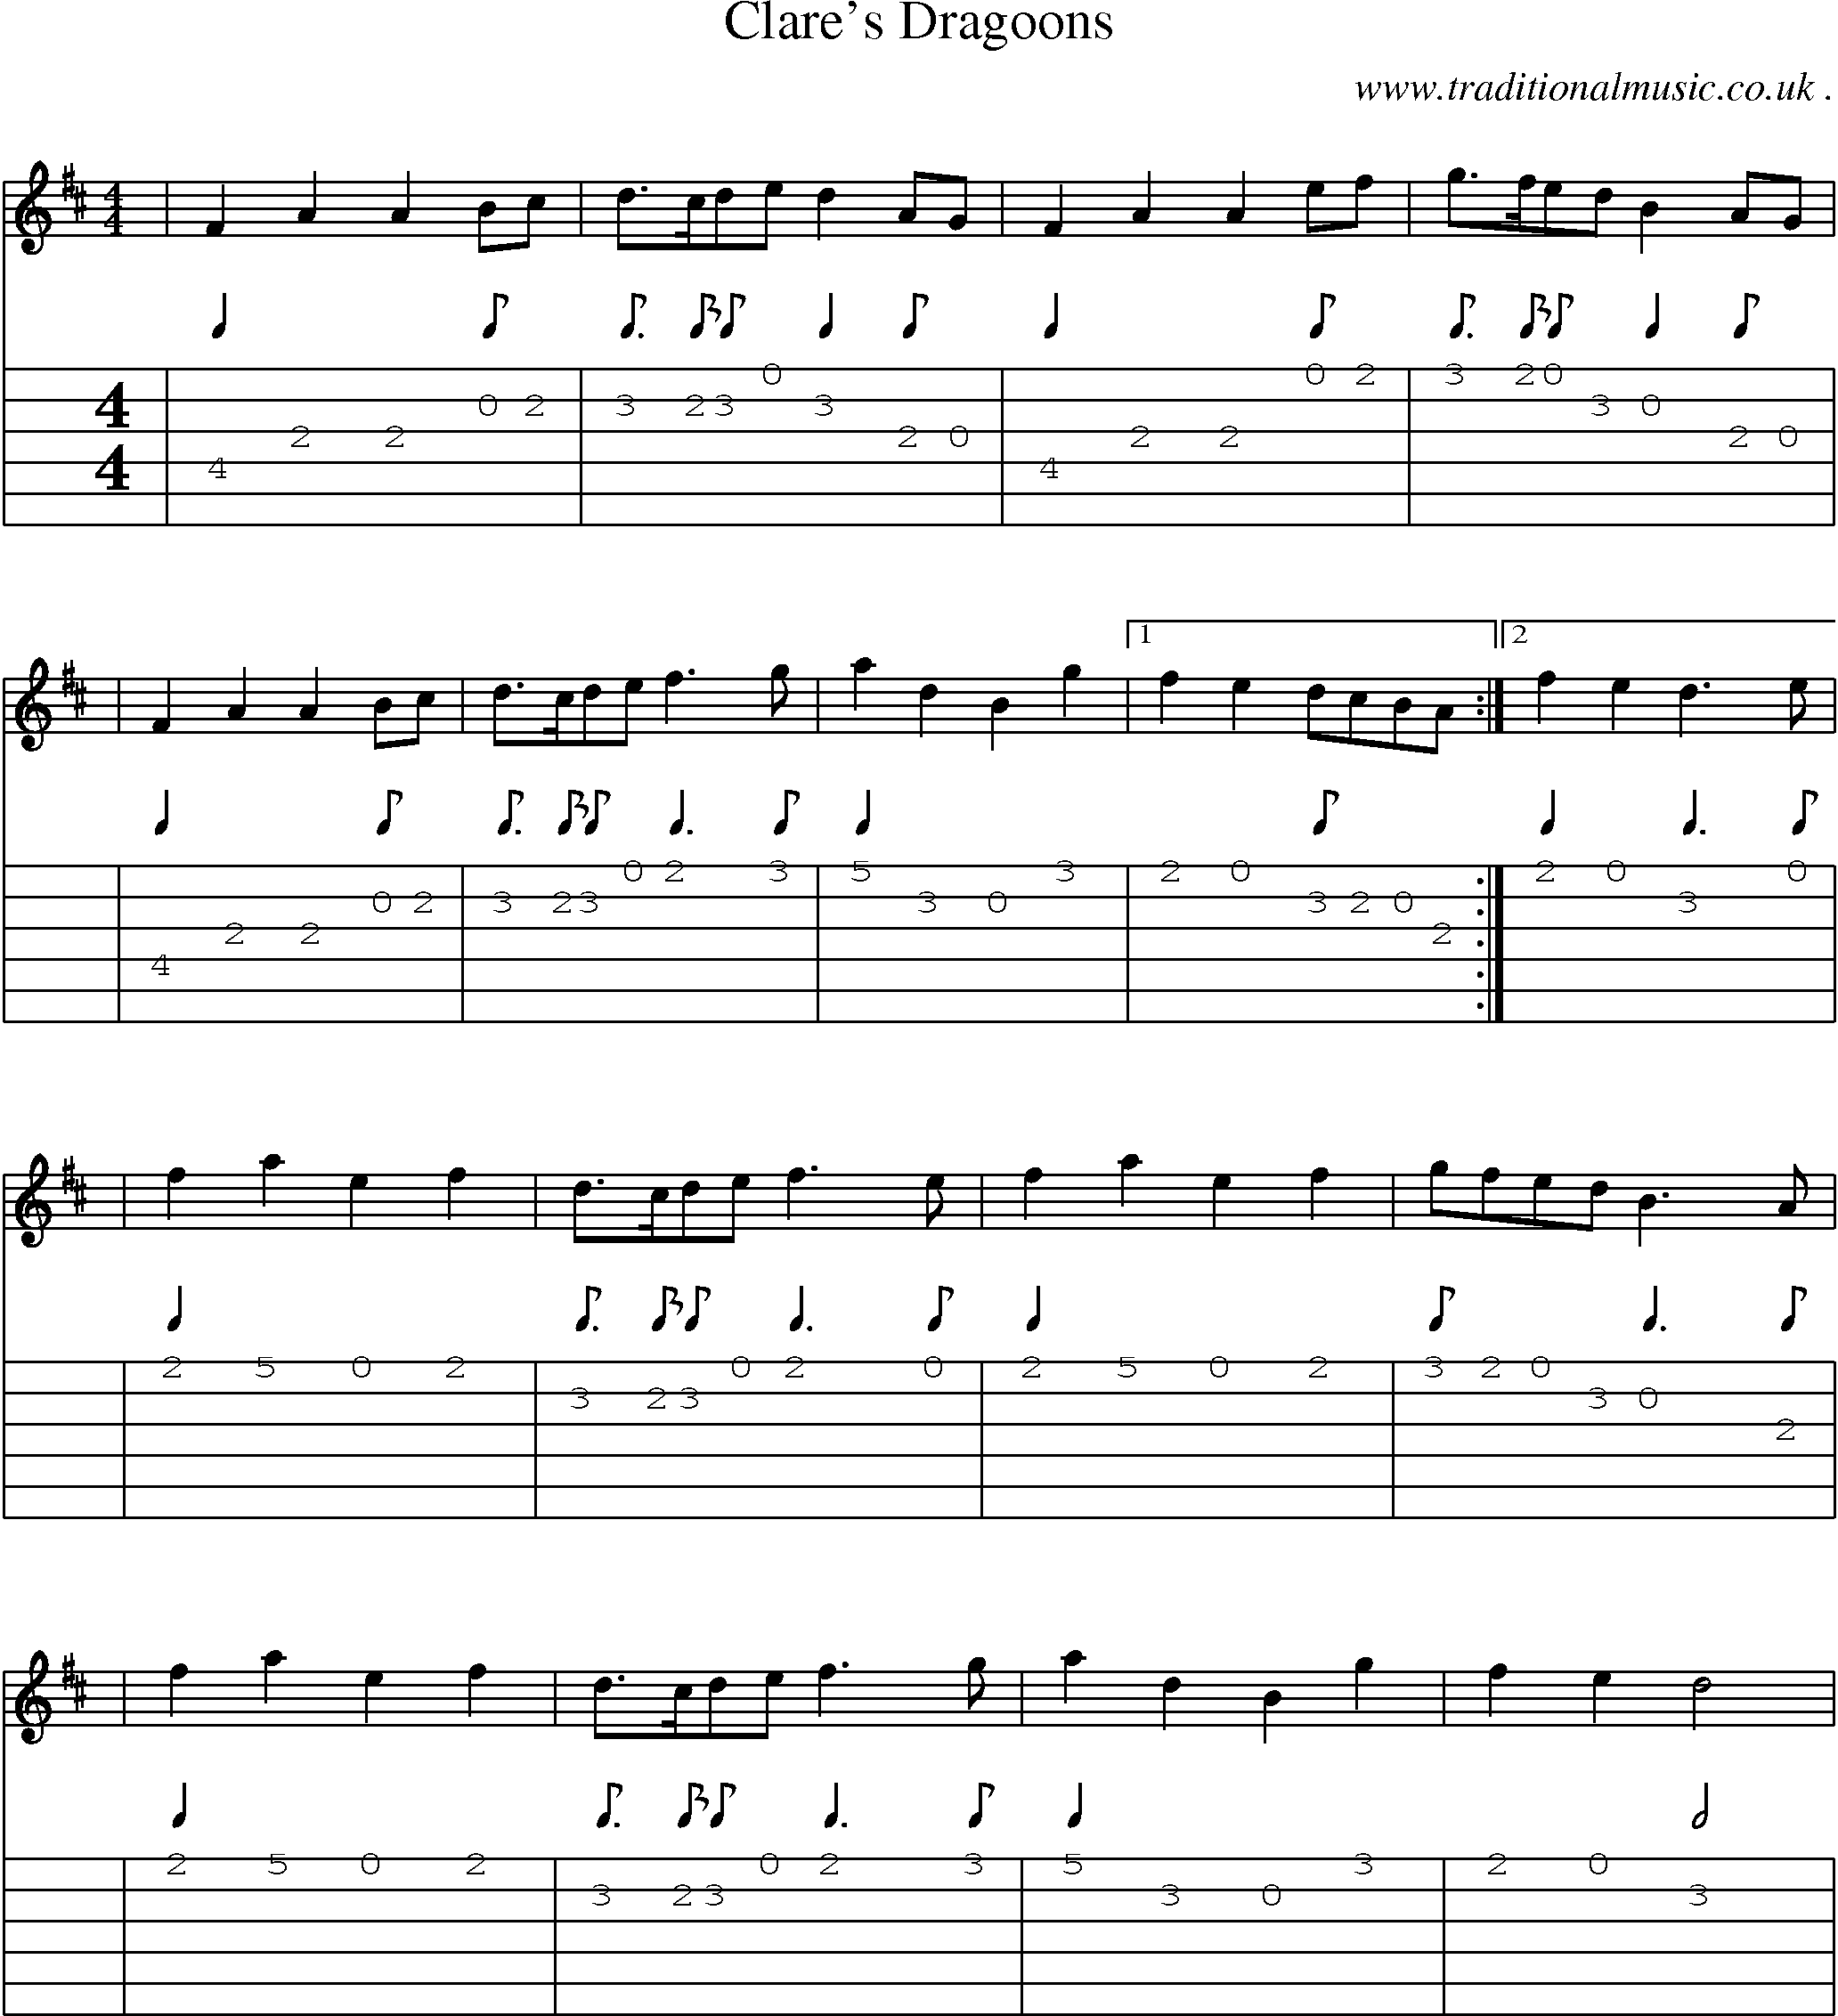 Sheet-Music and Guitar Tabs for Clares Dragoons